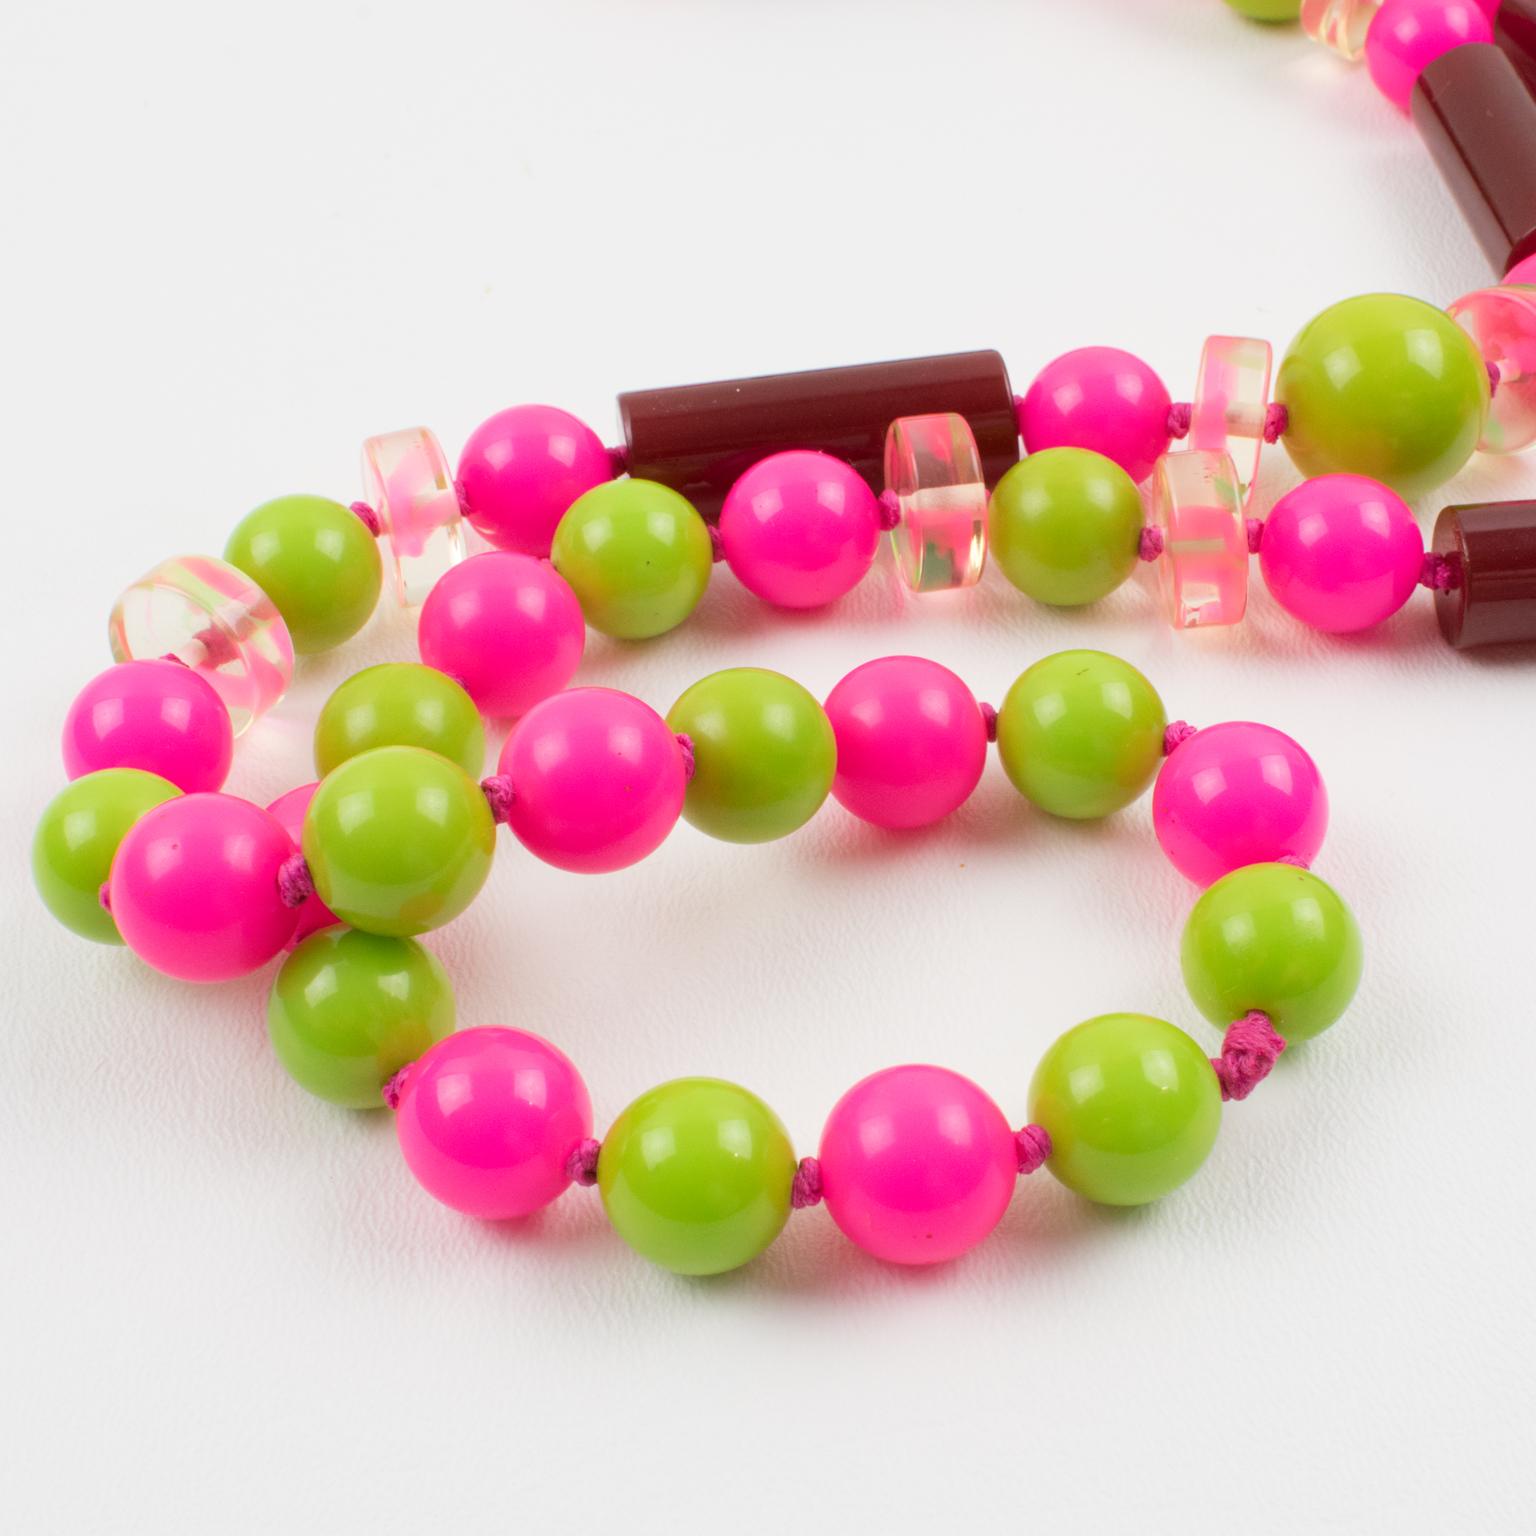 Bakelite and Lucite Extra Long Necklace Burgundy, Hot Pink, Apple Green Beads For Sale 3